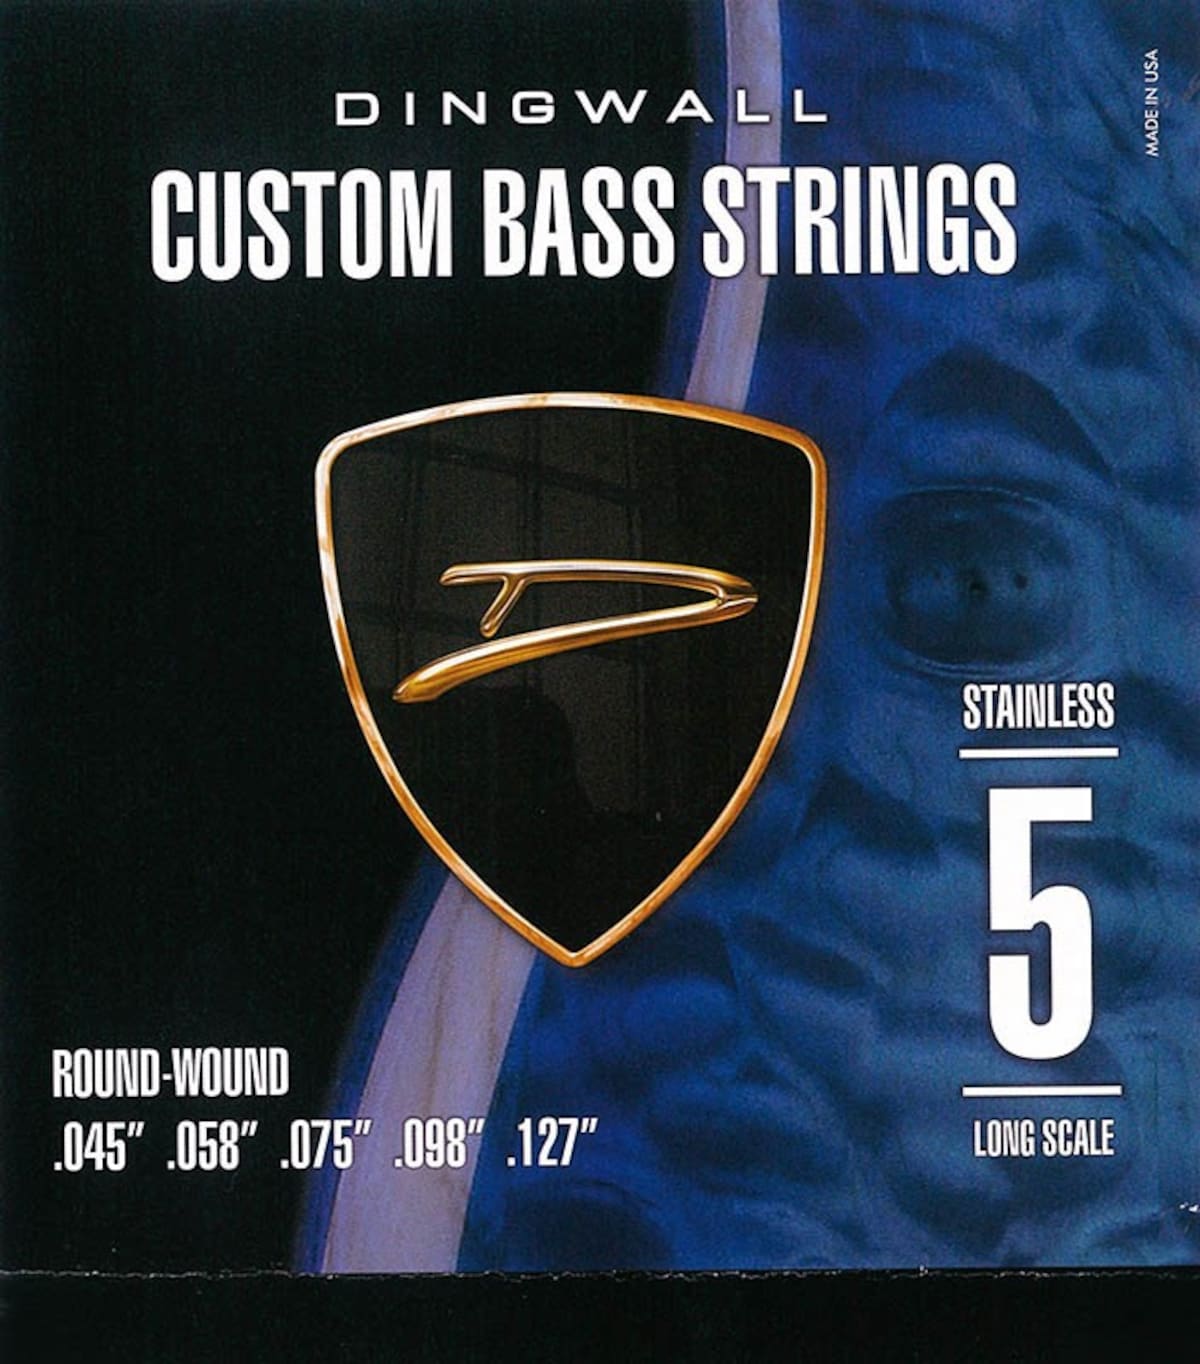 DINGWALL CUSTOM BASS STRINGS [STAINLESS 5ST] SET ROUND-WOUND .045-.127 